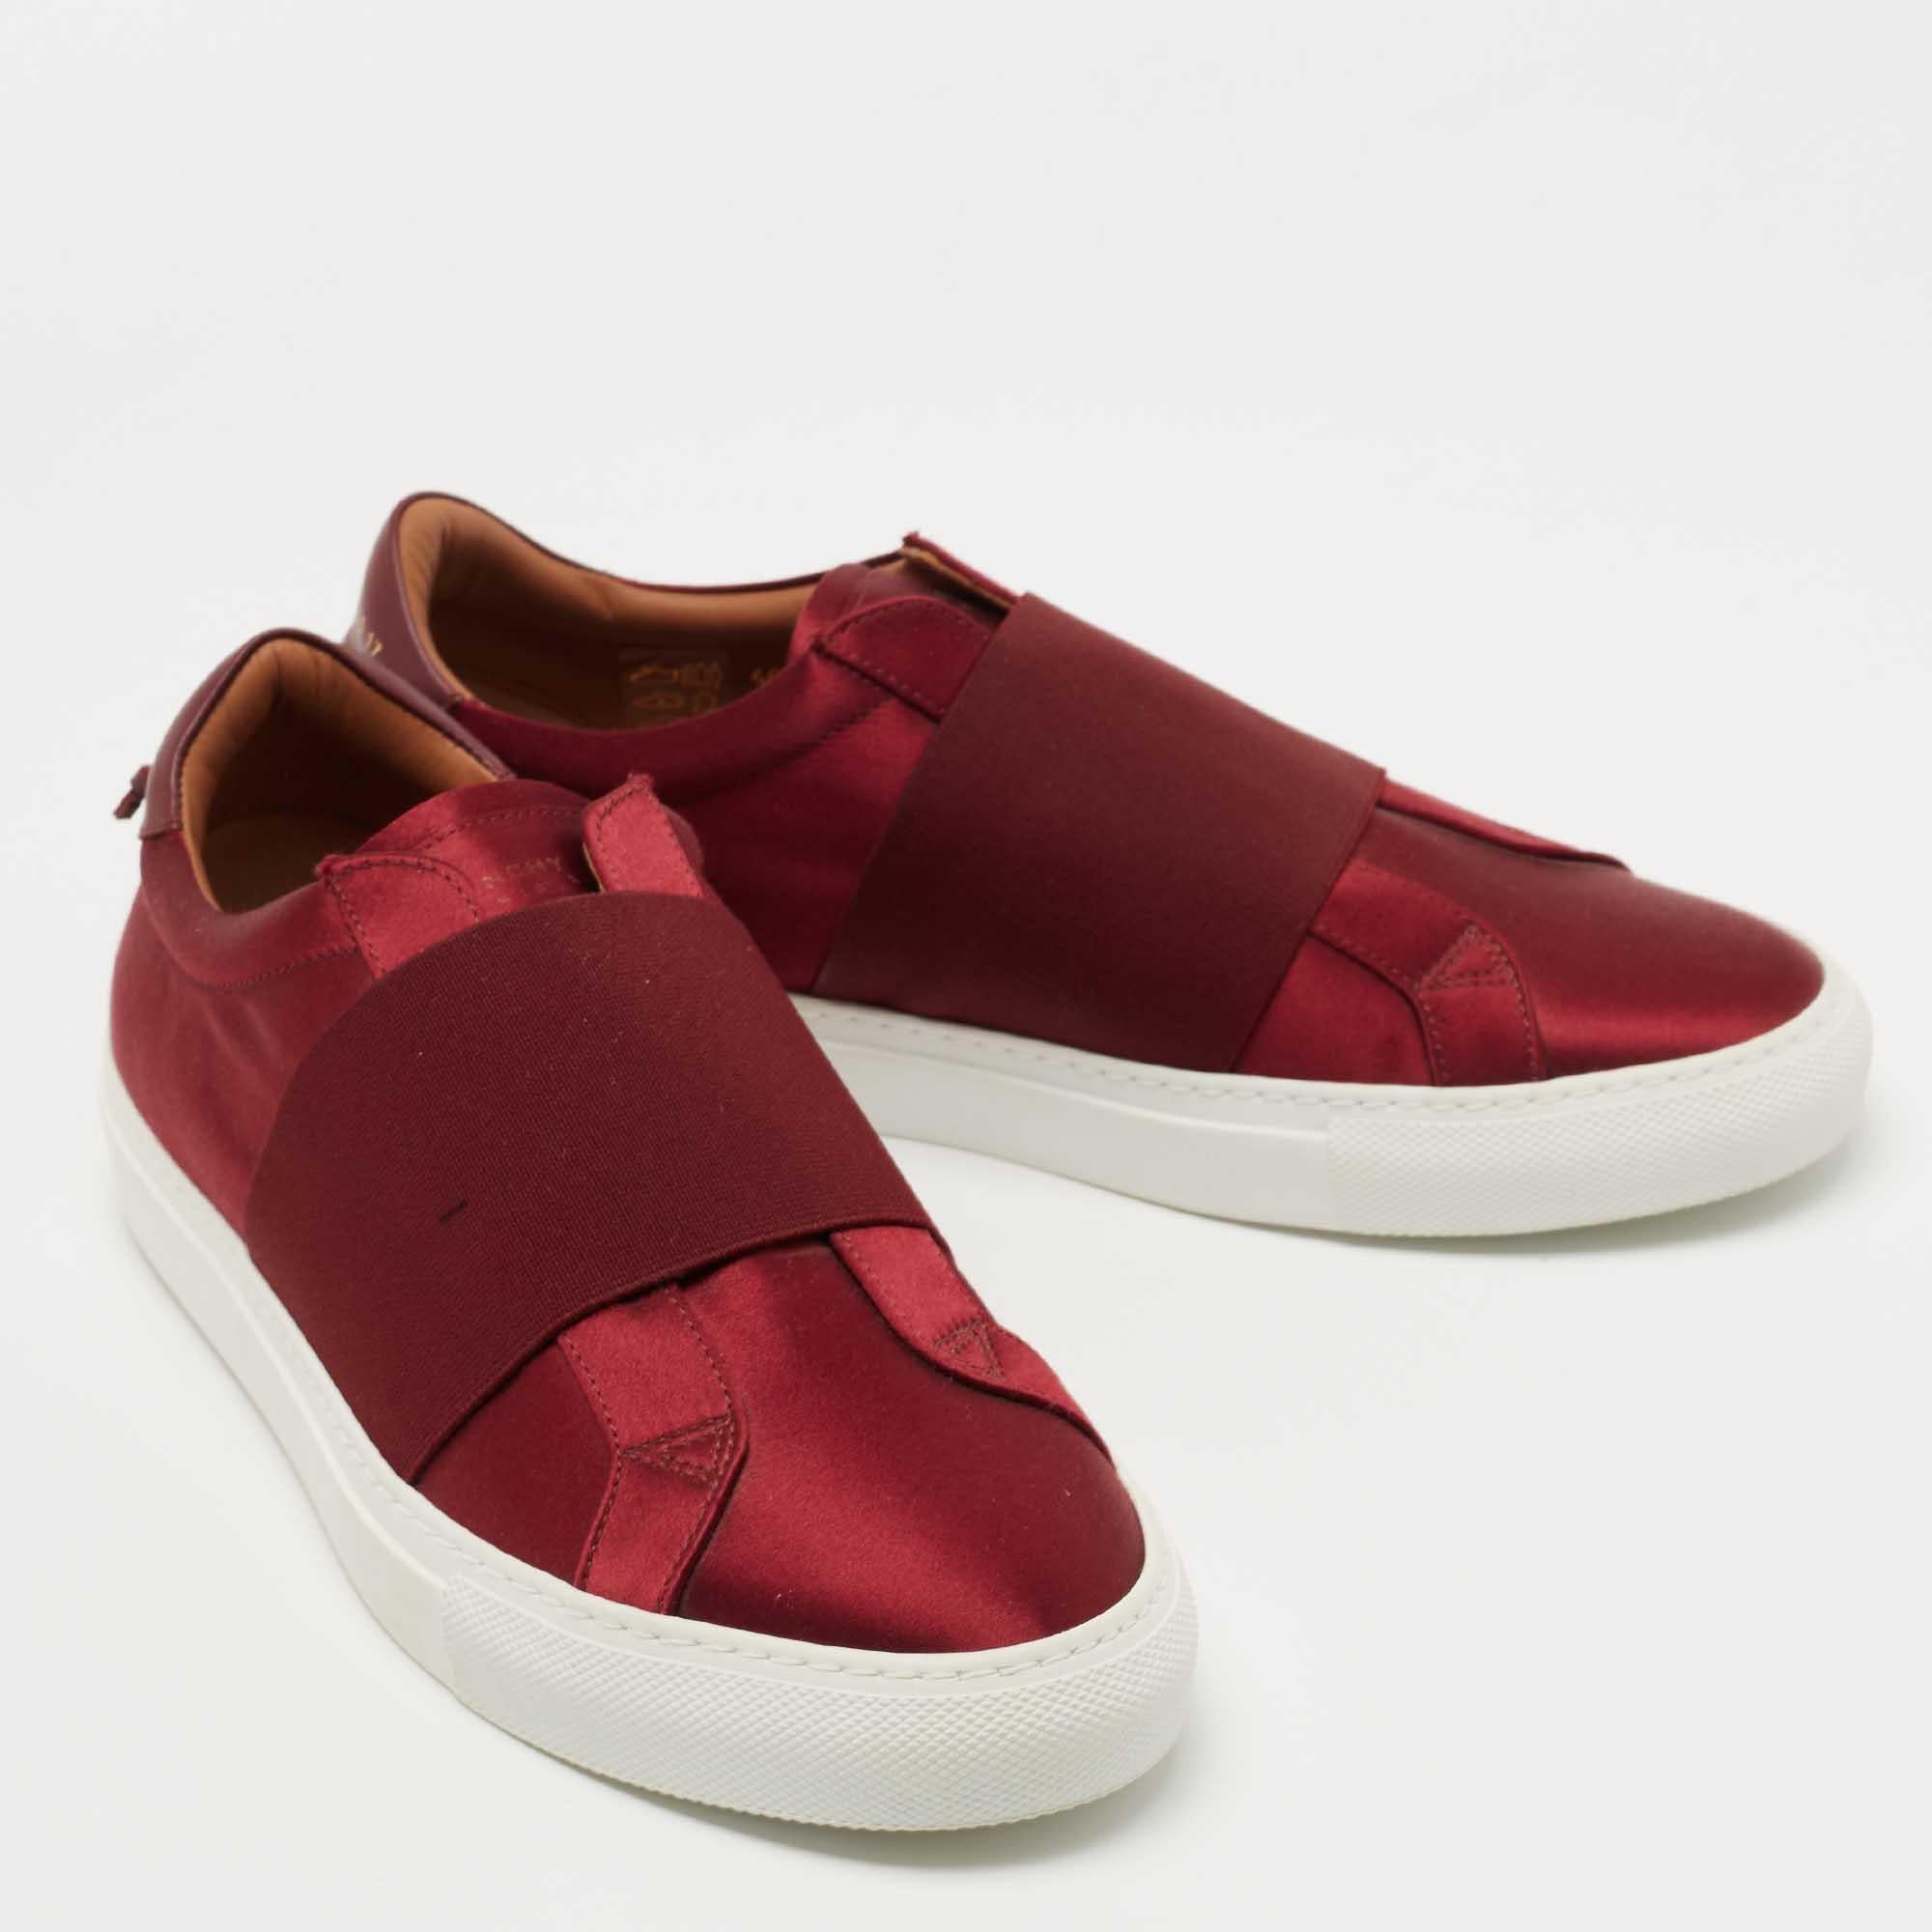 Brown Givenchy Burgundy Satin and Elastic Band Slip On Sneakers Size 40 For Sale